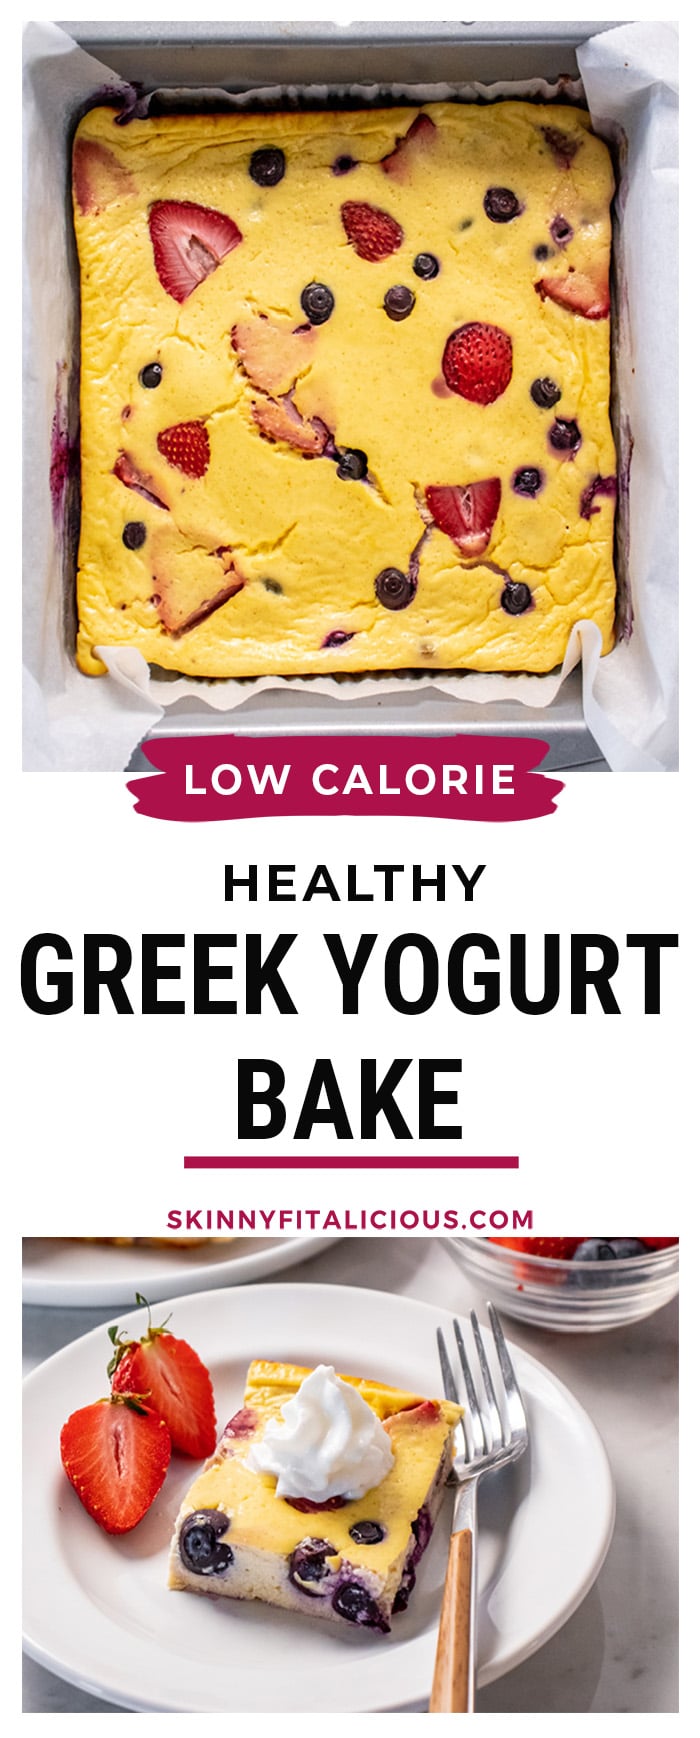 No Sugar Greek Yogurt Bake is a protein bake made low calorie and flourless. Baked in the oven with just 6 simple ingredients, these easy bake can be served for a healthy protein snack or breakfast. 